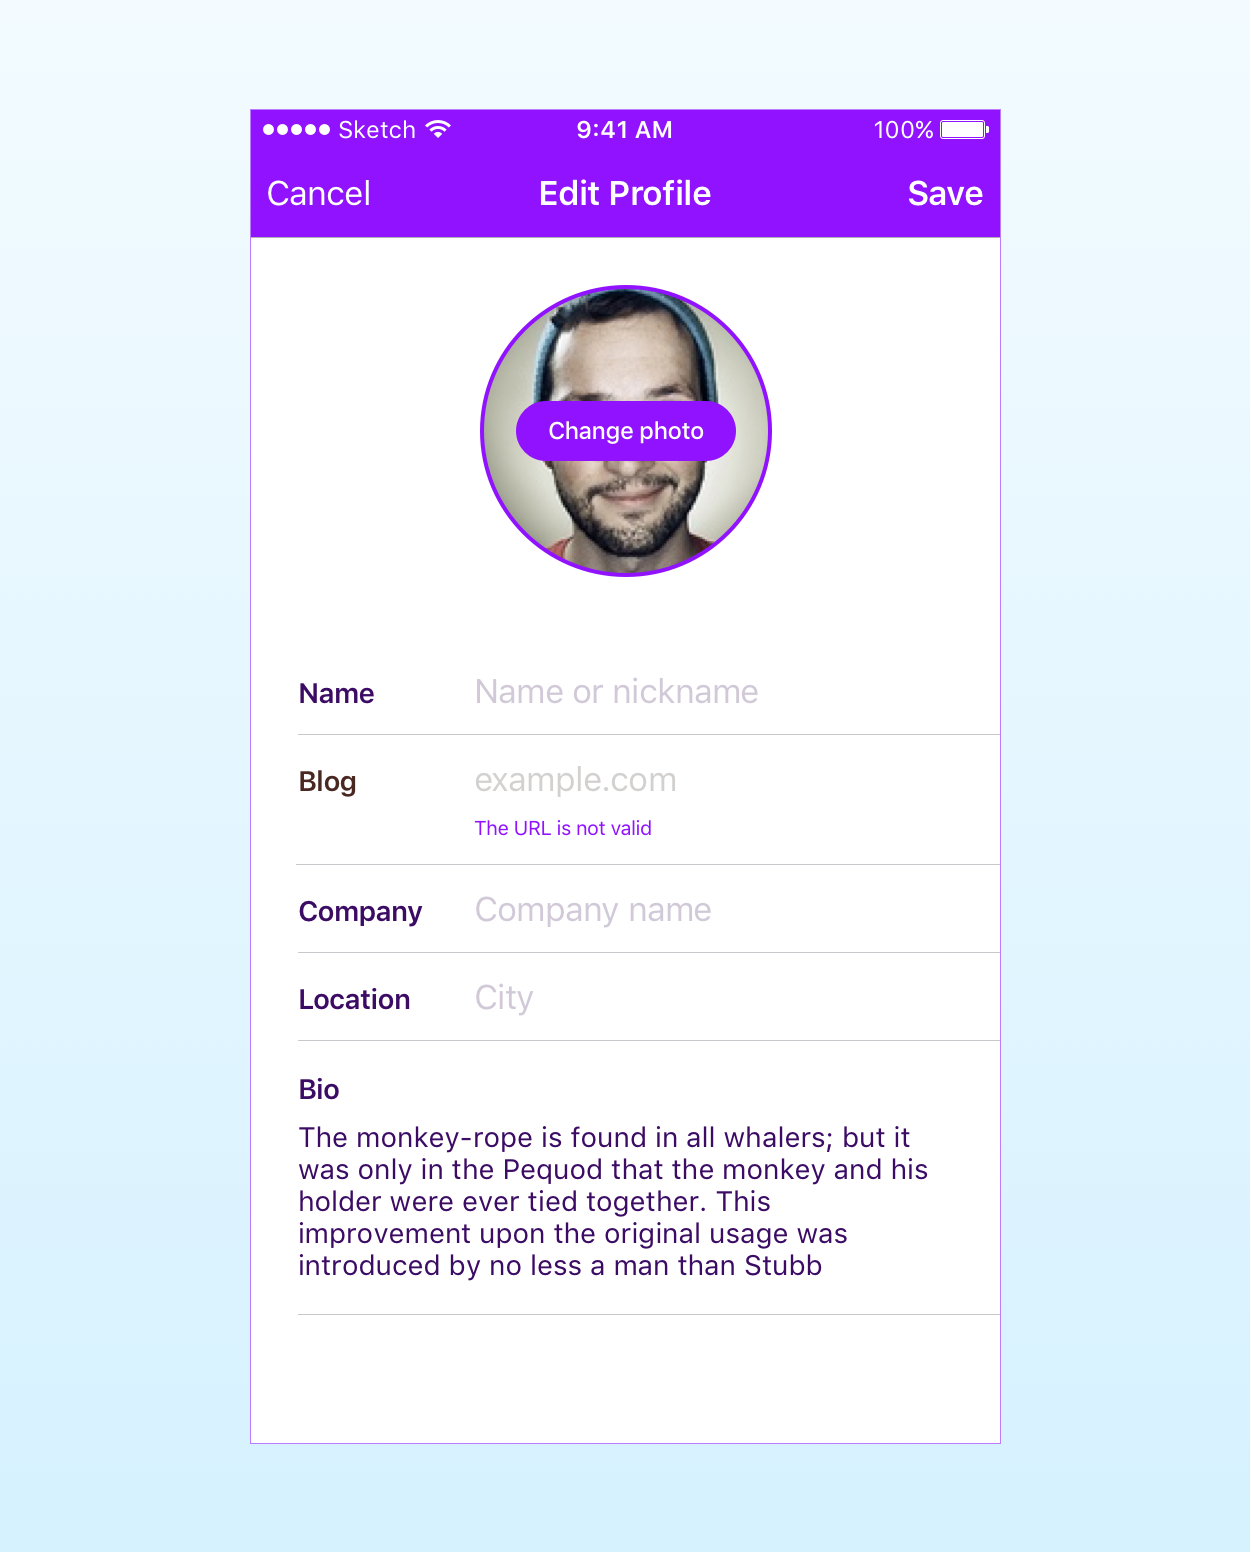 The app's screen to edit the user's profile